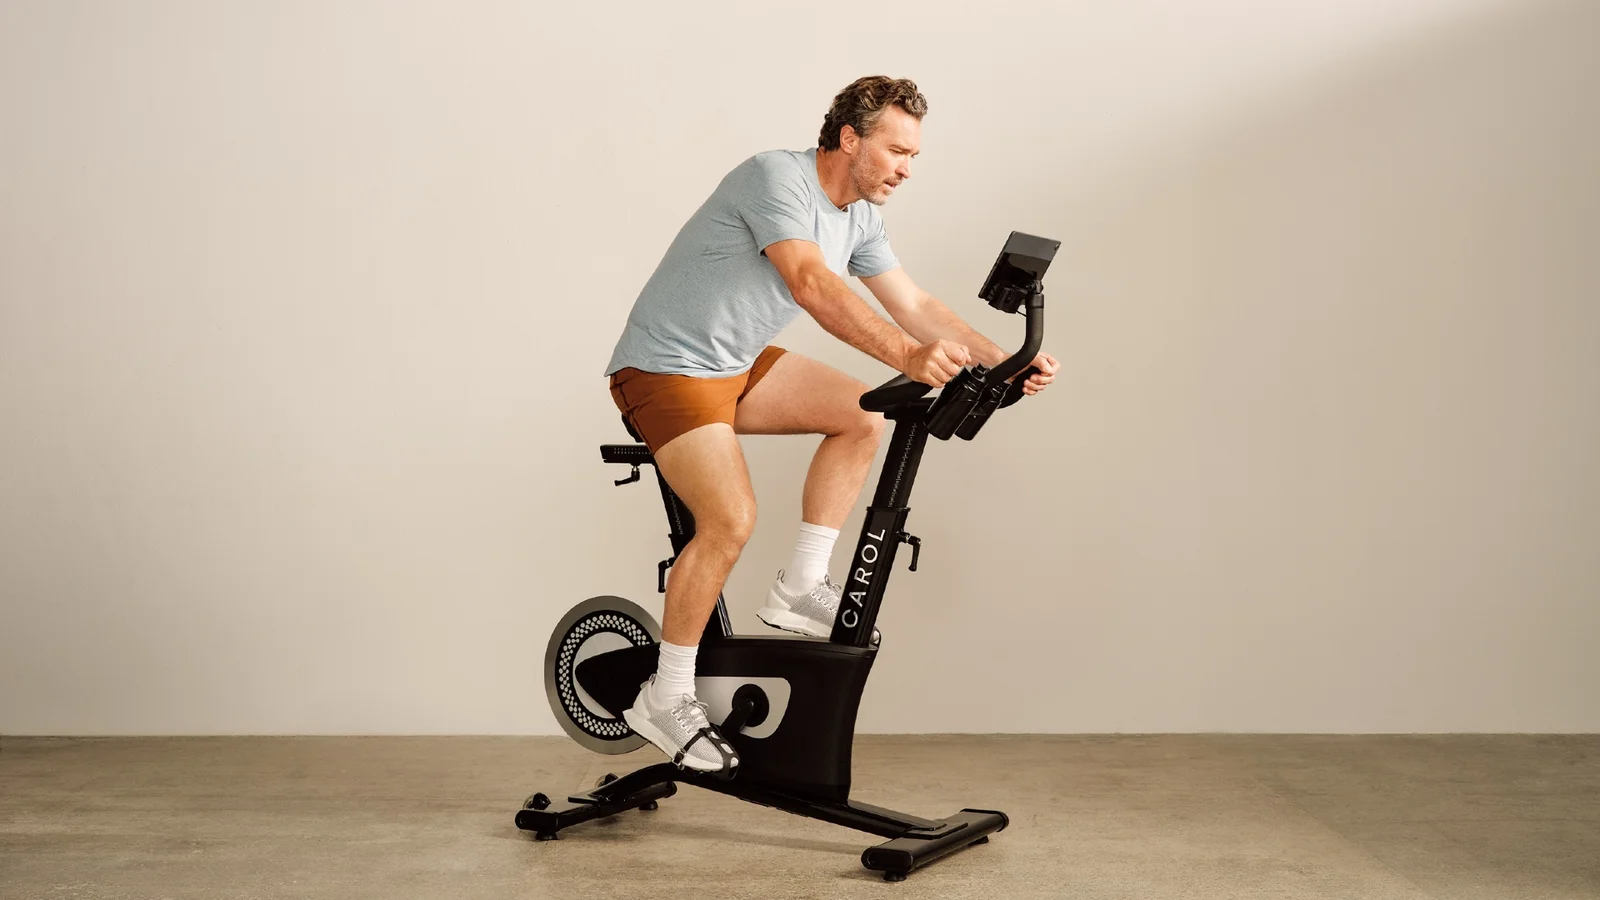 7 Best Machine Exercises for Rapid Weight Loss